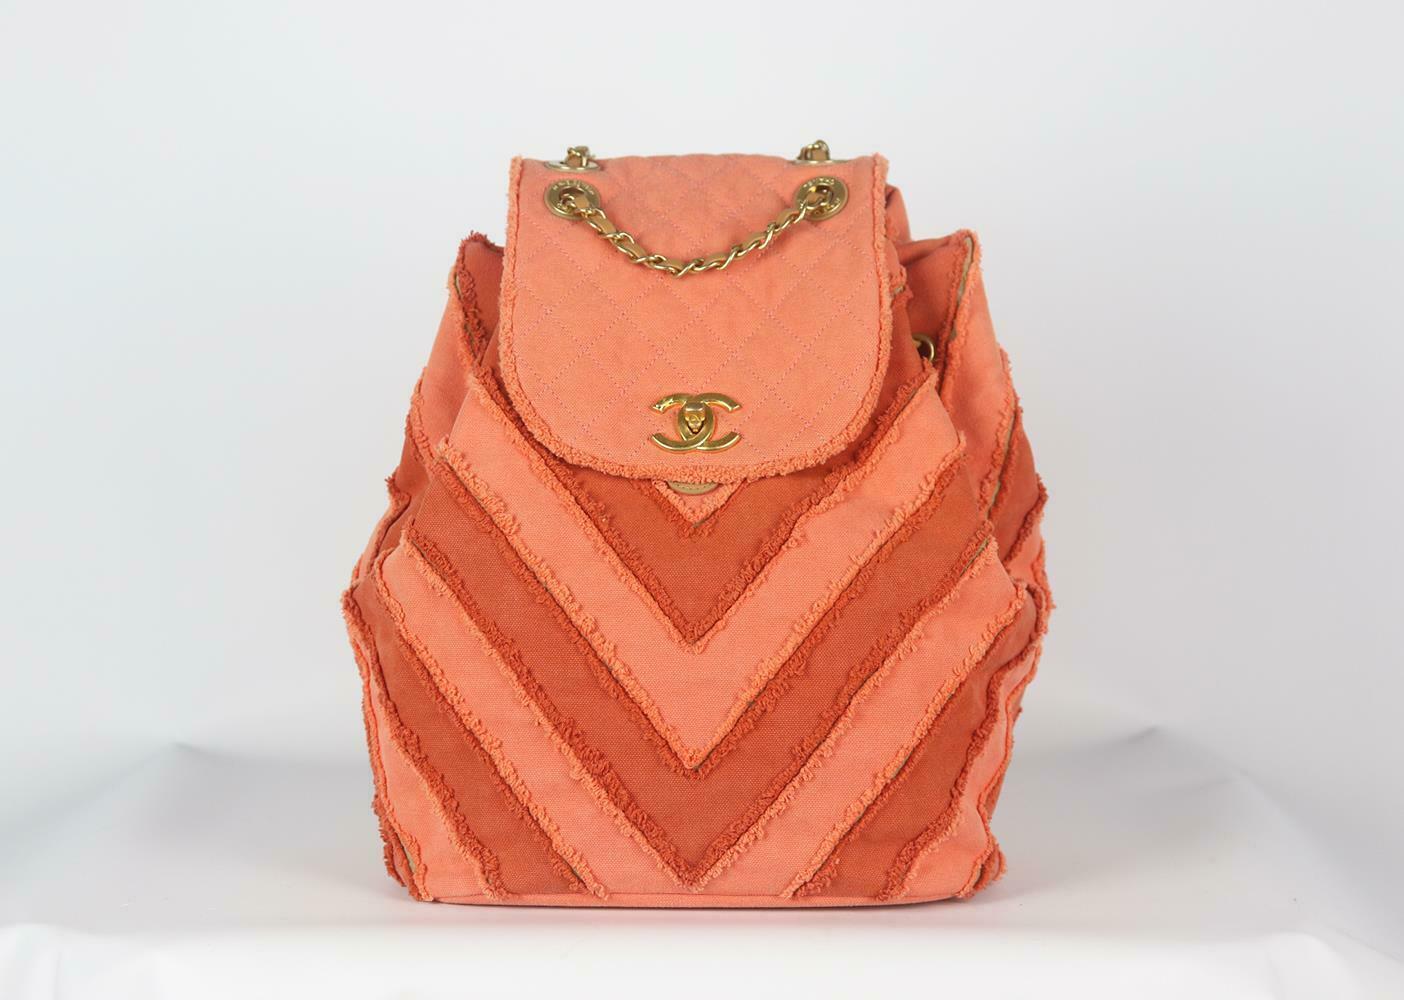 Made in Italy, this beautiful Chanel Coco Cuba Chevron backpack has been made from orange canvas and beige leather exterior with grey fabric interior, this piece is decorated with Chanel's logo in antiqued-gold on the front and finished with chain